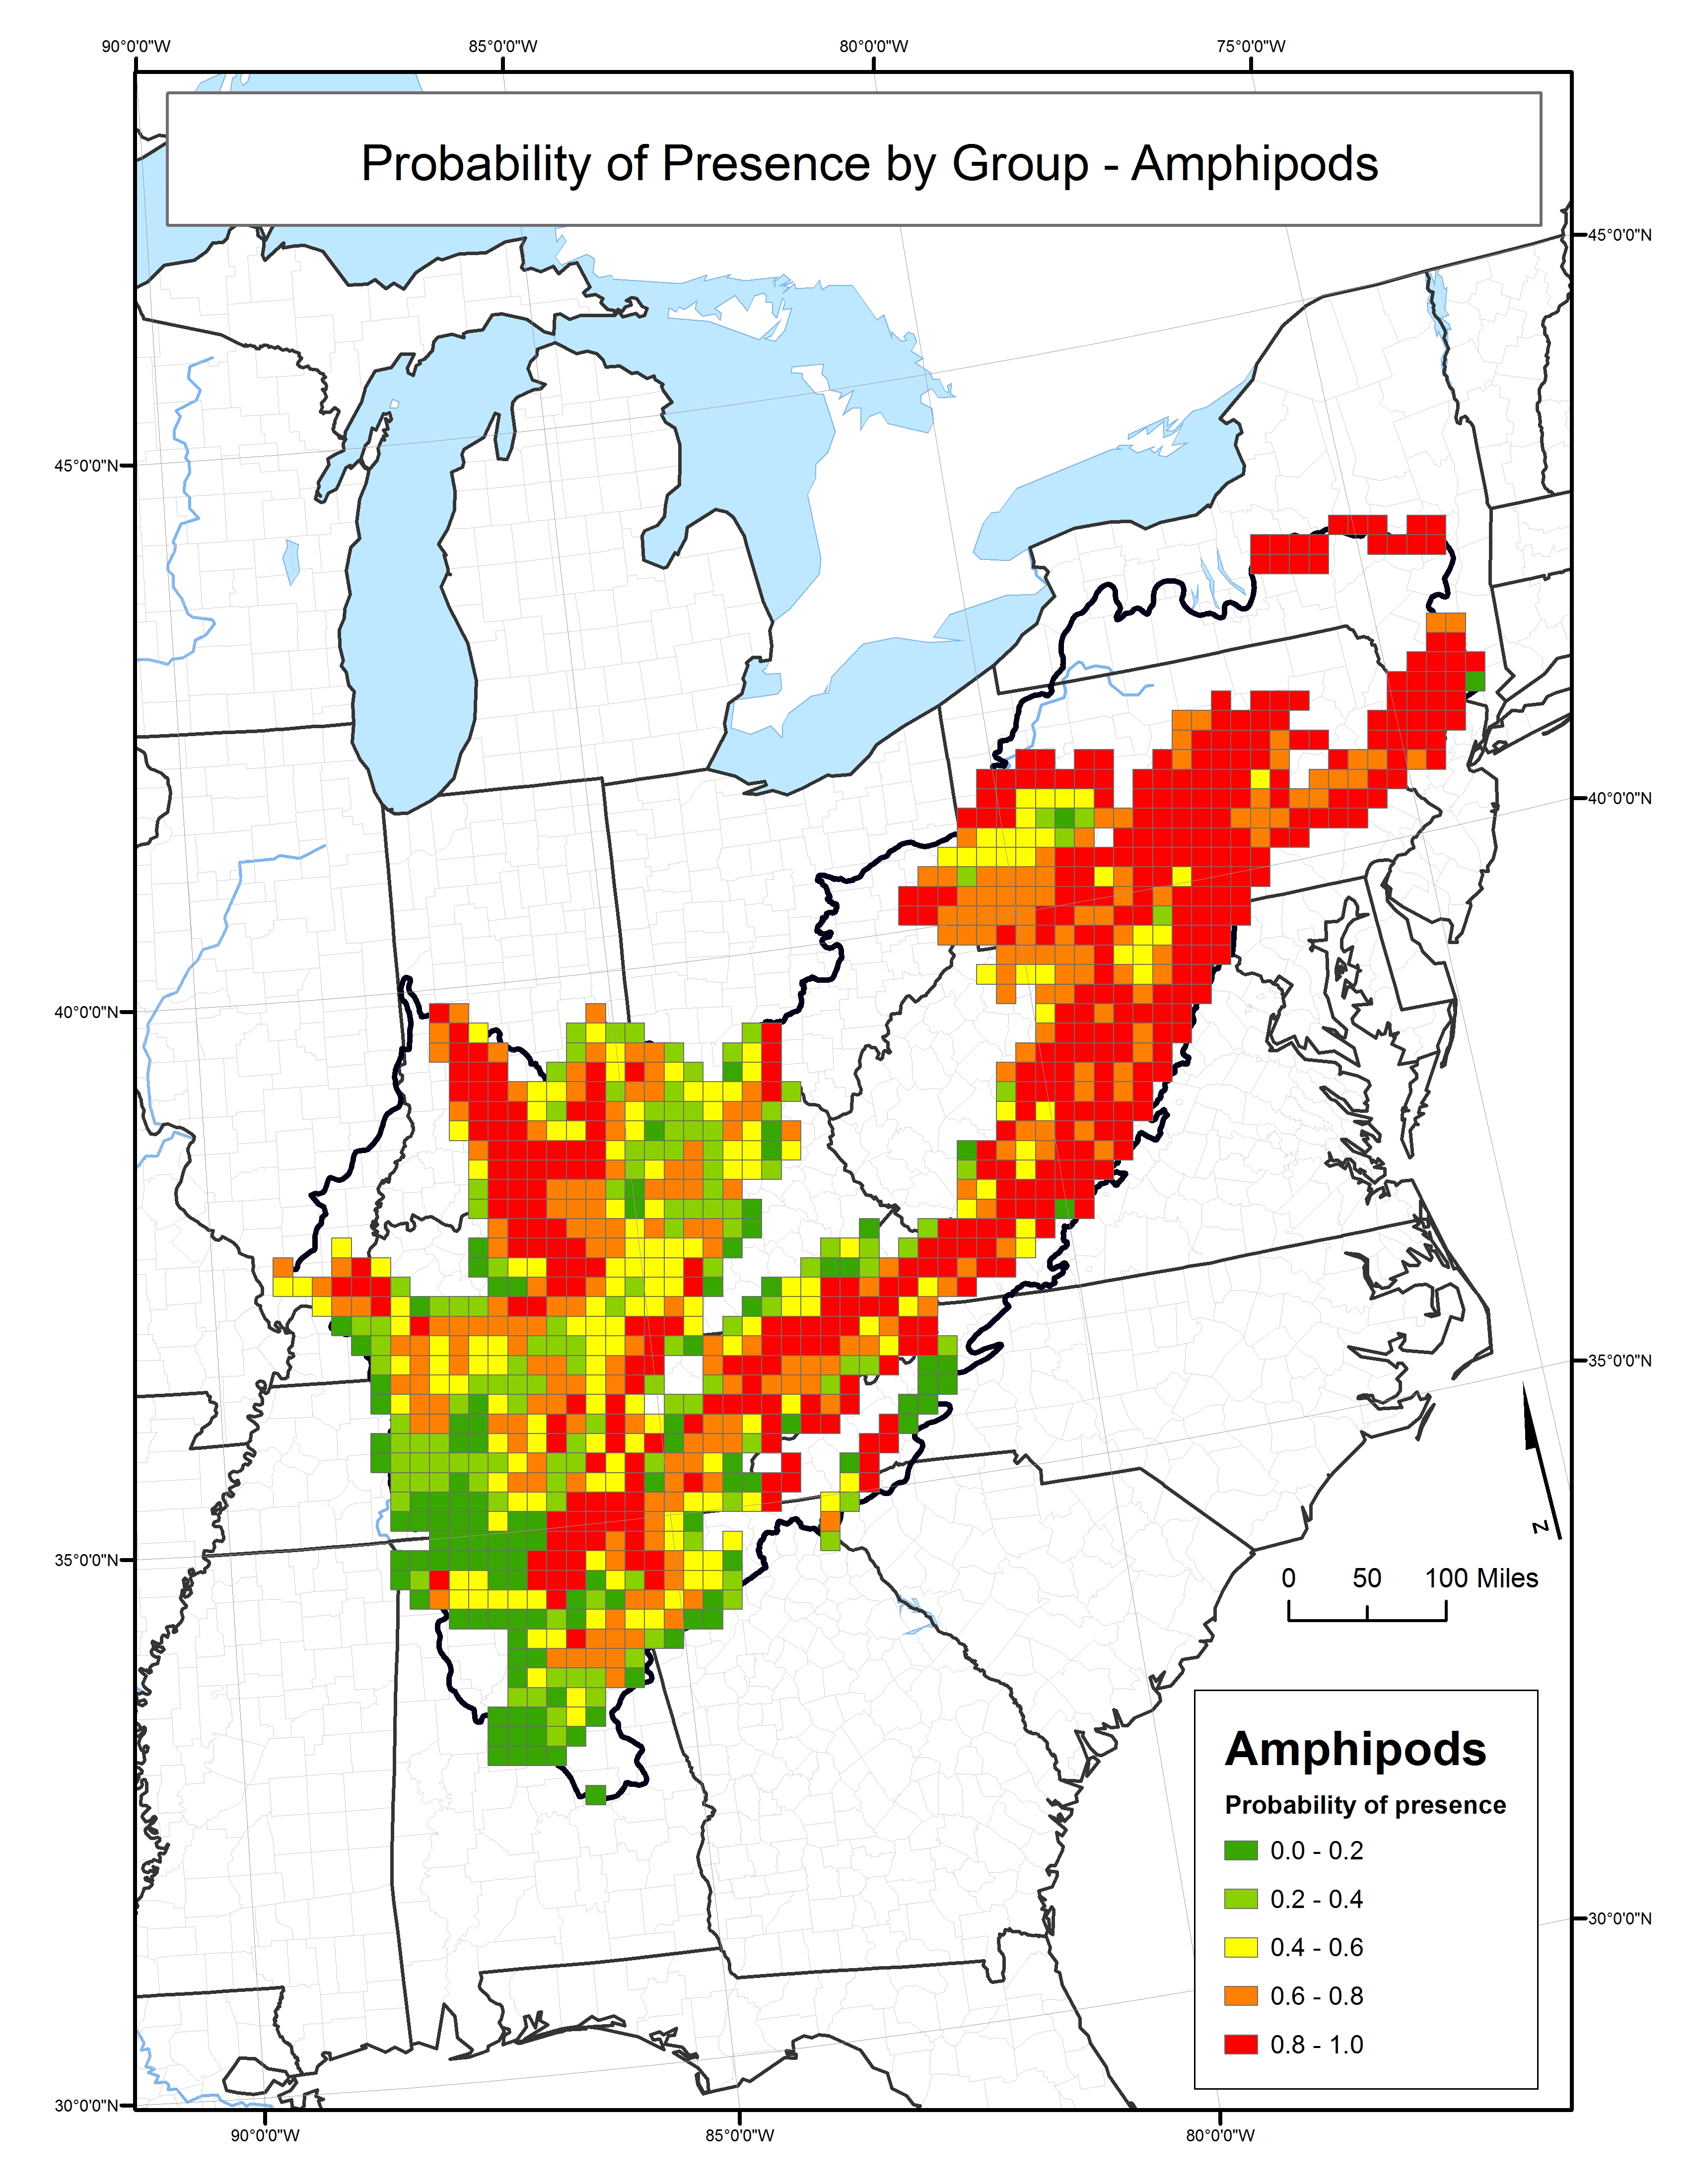 Probability of Presence for Amphipods